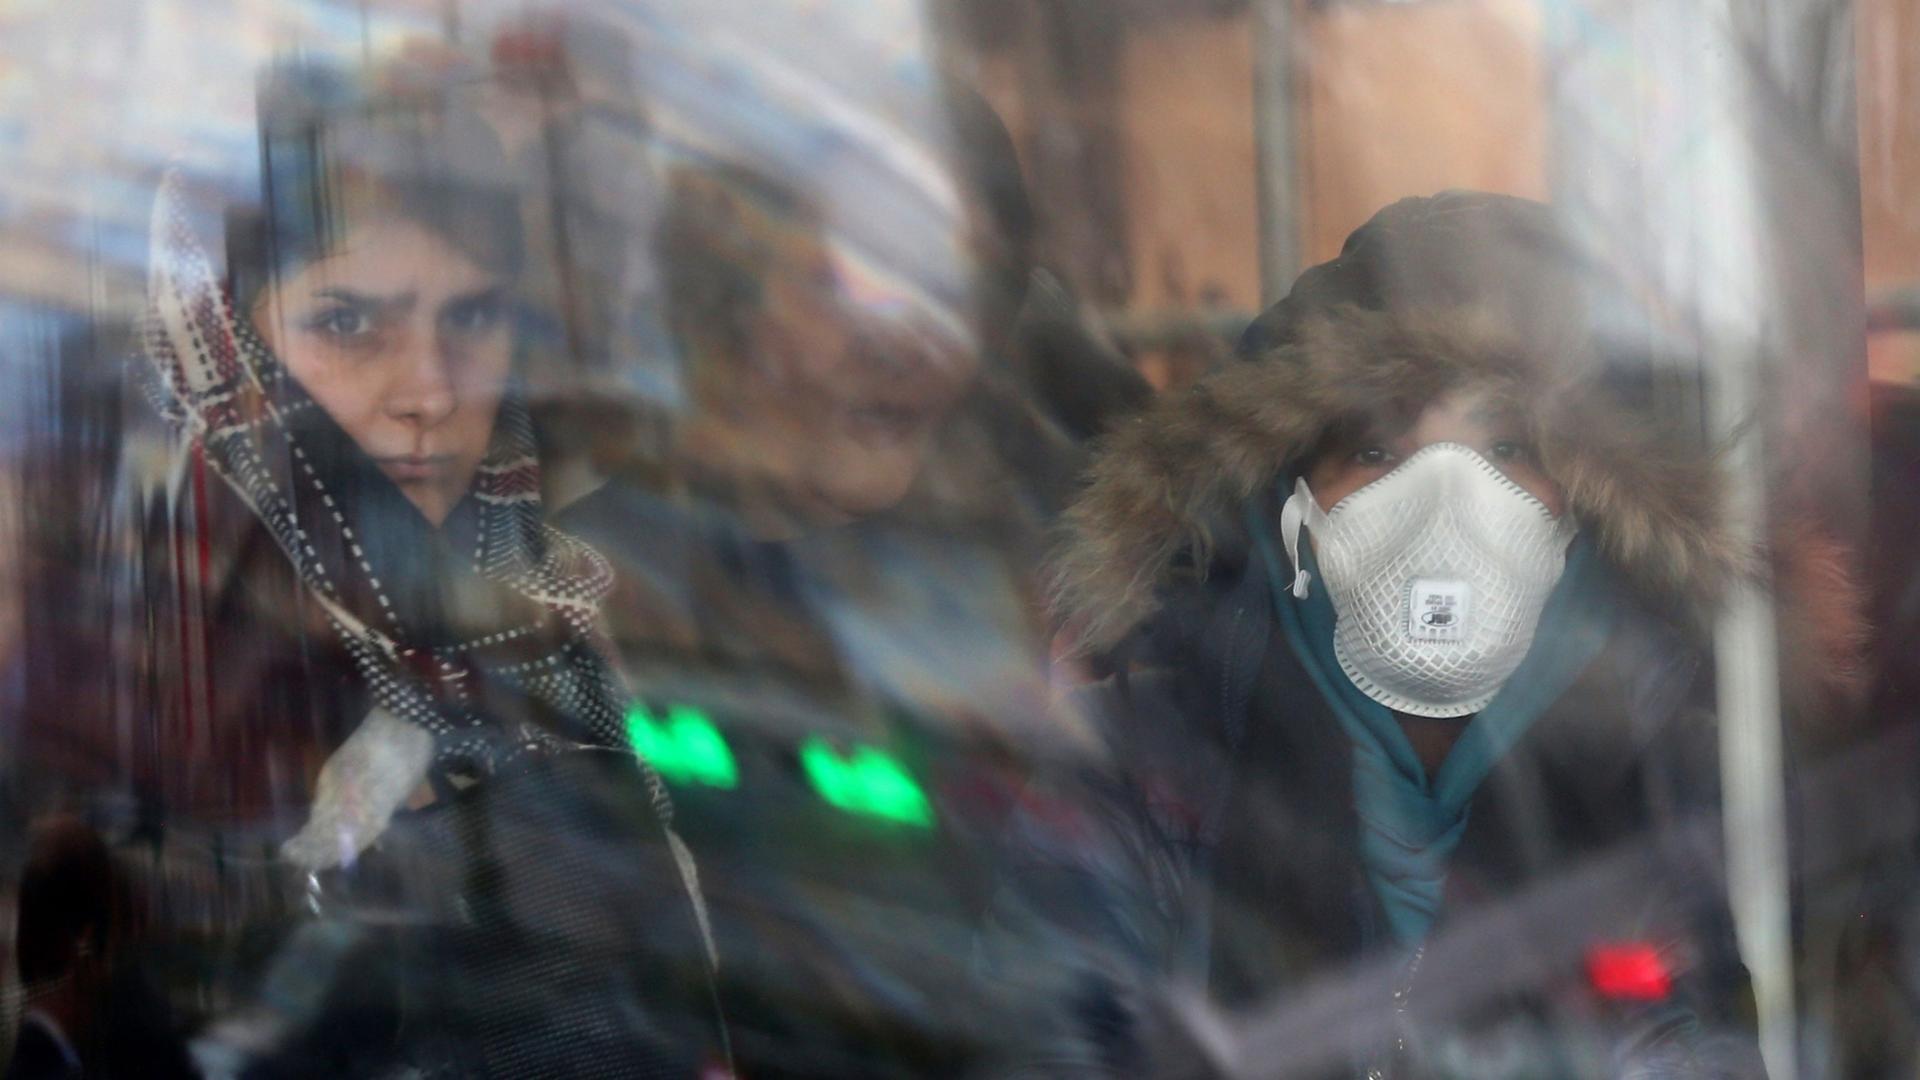 Women are shown through reflecting glass with one wearing a face mask and a hooded jacket.